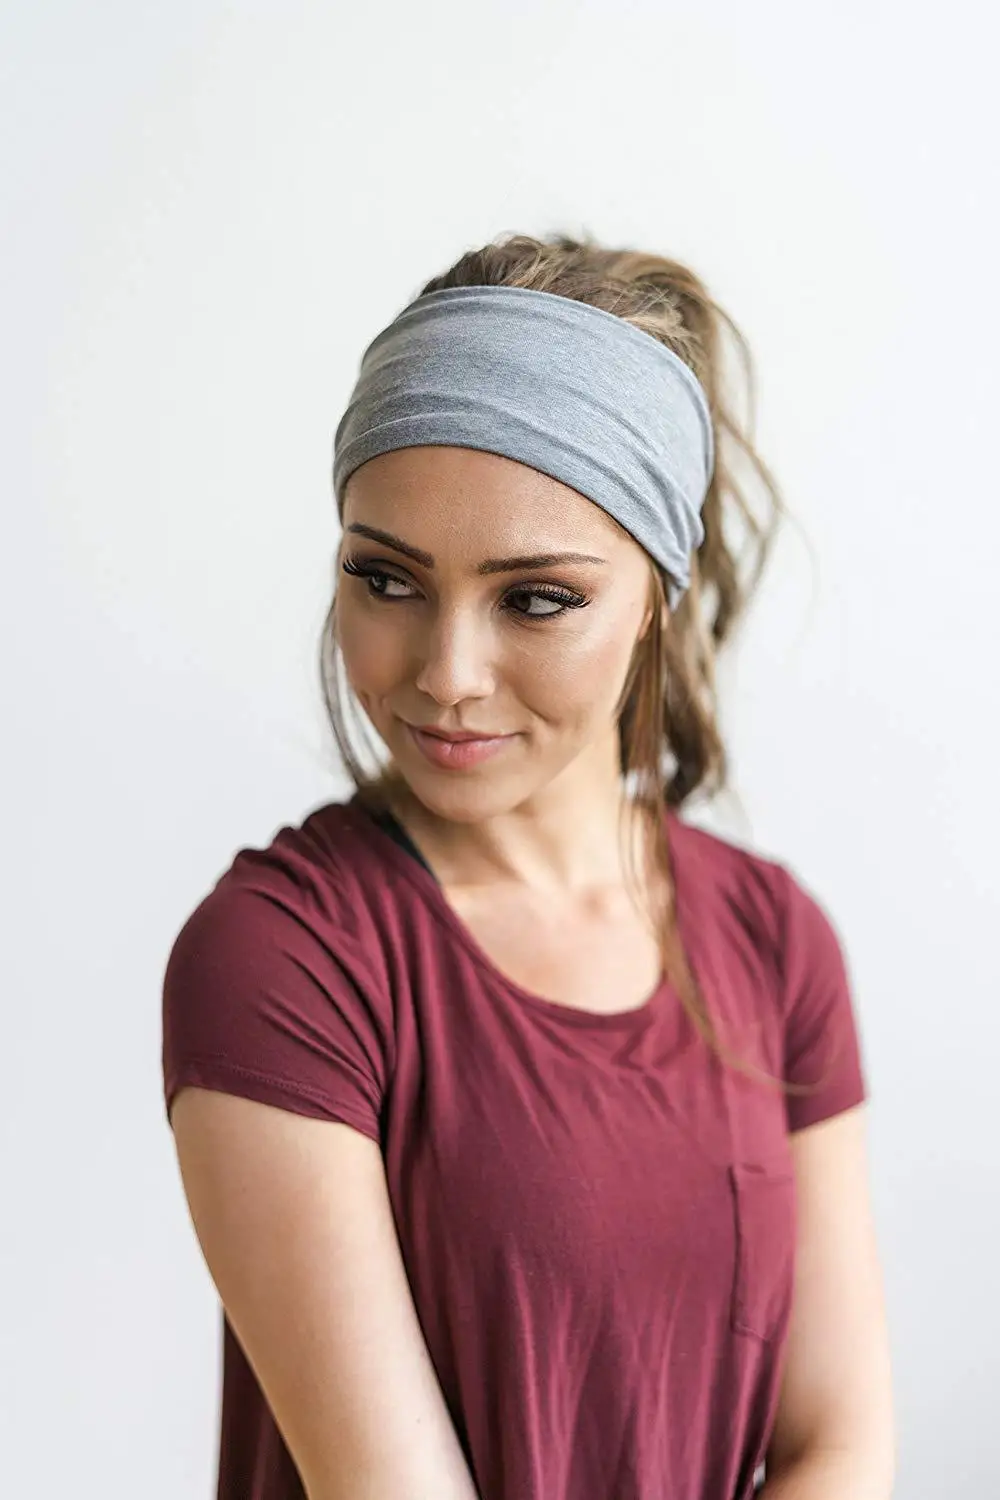 Women Headband Solid Color Wide Turban Cotton Sport Yoga Headband Twisted Knotted Headwrap Hair Accessories Free Shipping